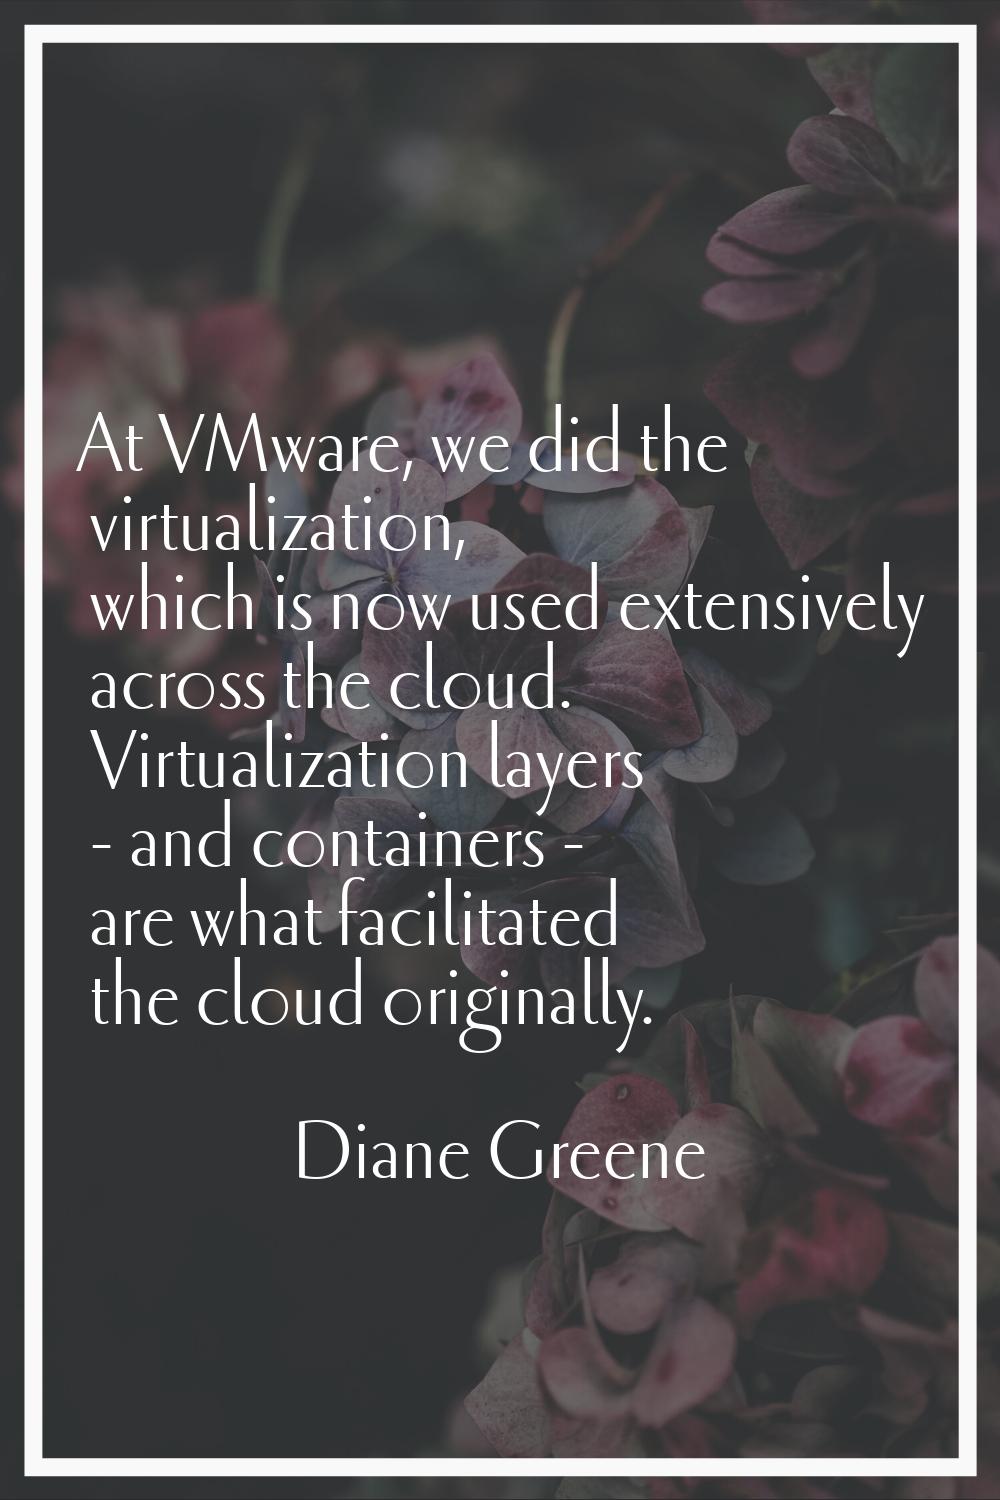 At VMware, we did the virtualization, which is now used extensively across the cloud. Virtualizatio